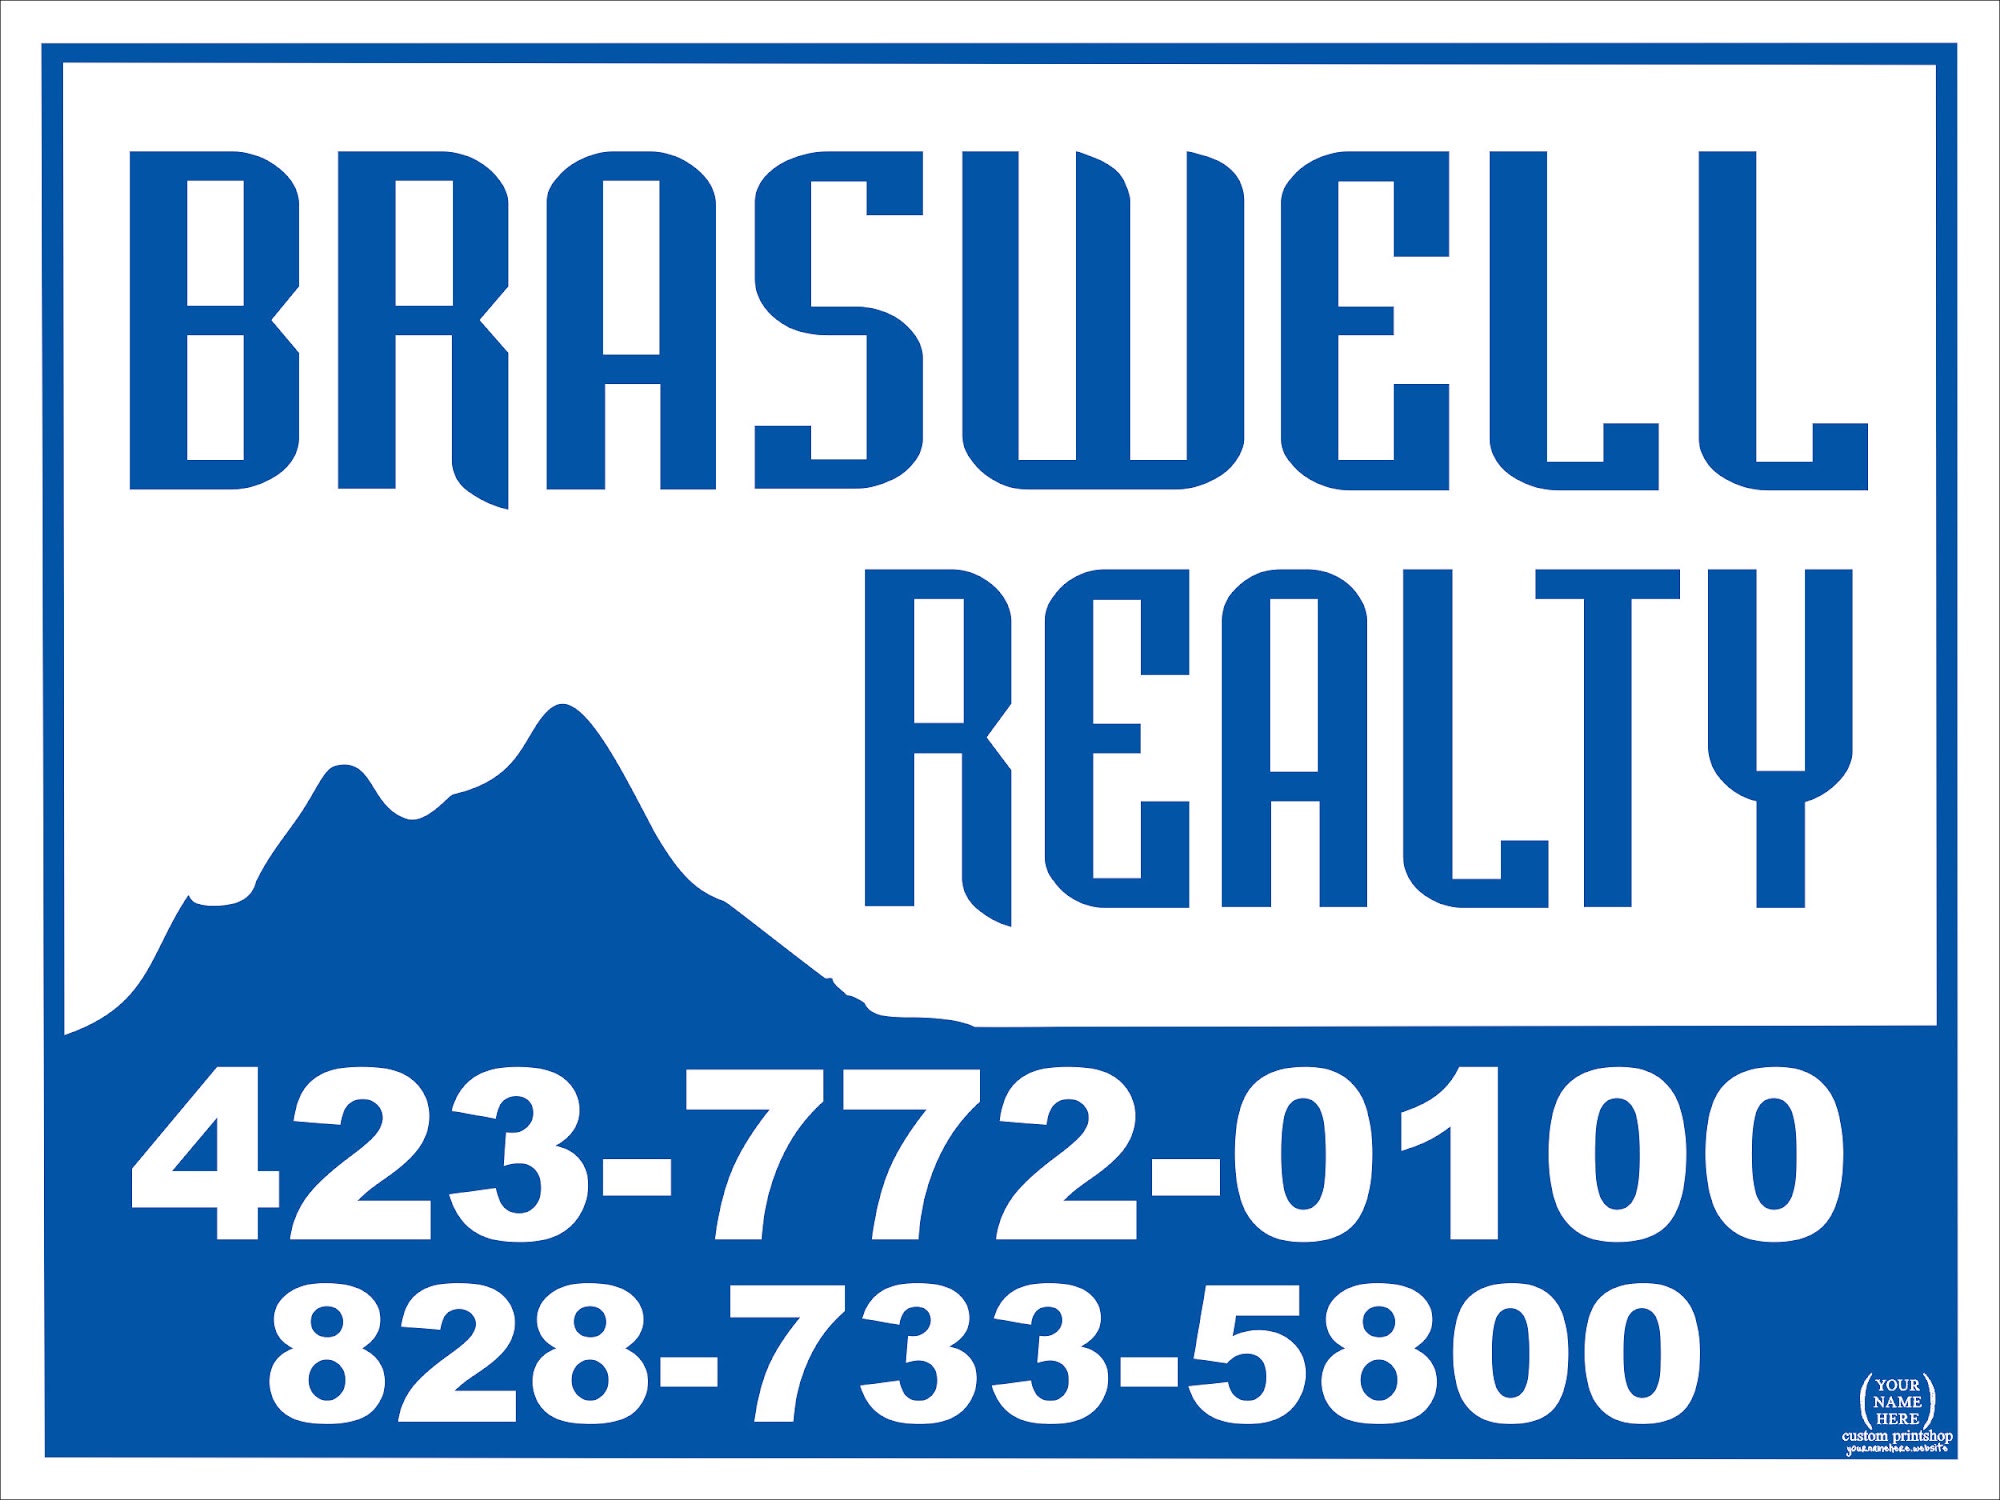 Braswell Realty 320 Linville St, Newland North Carolina 28657